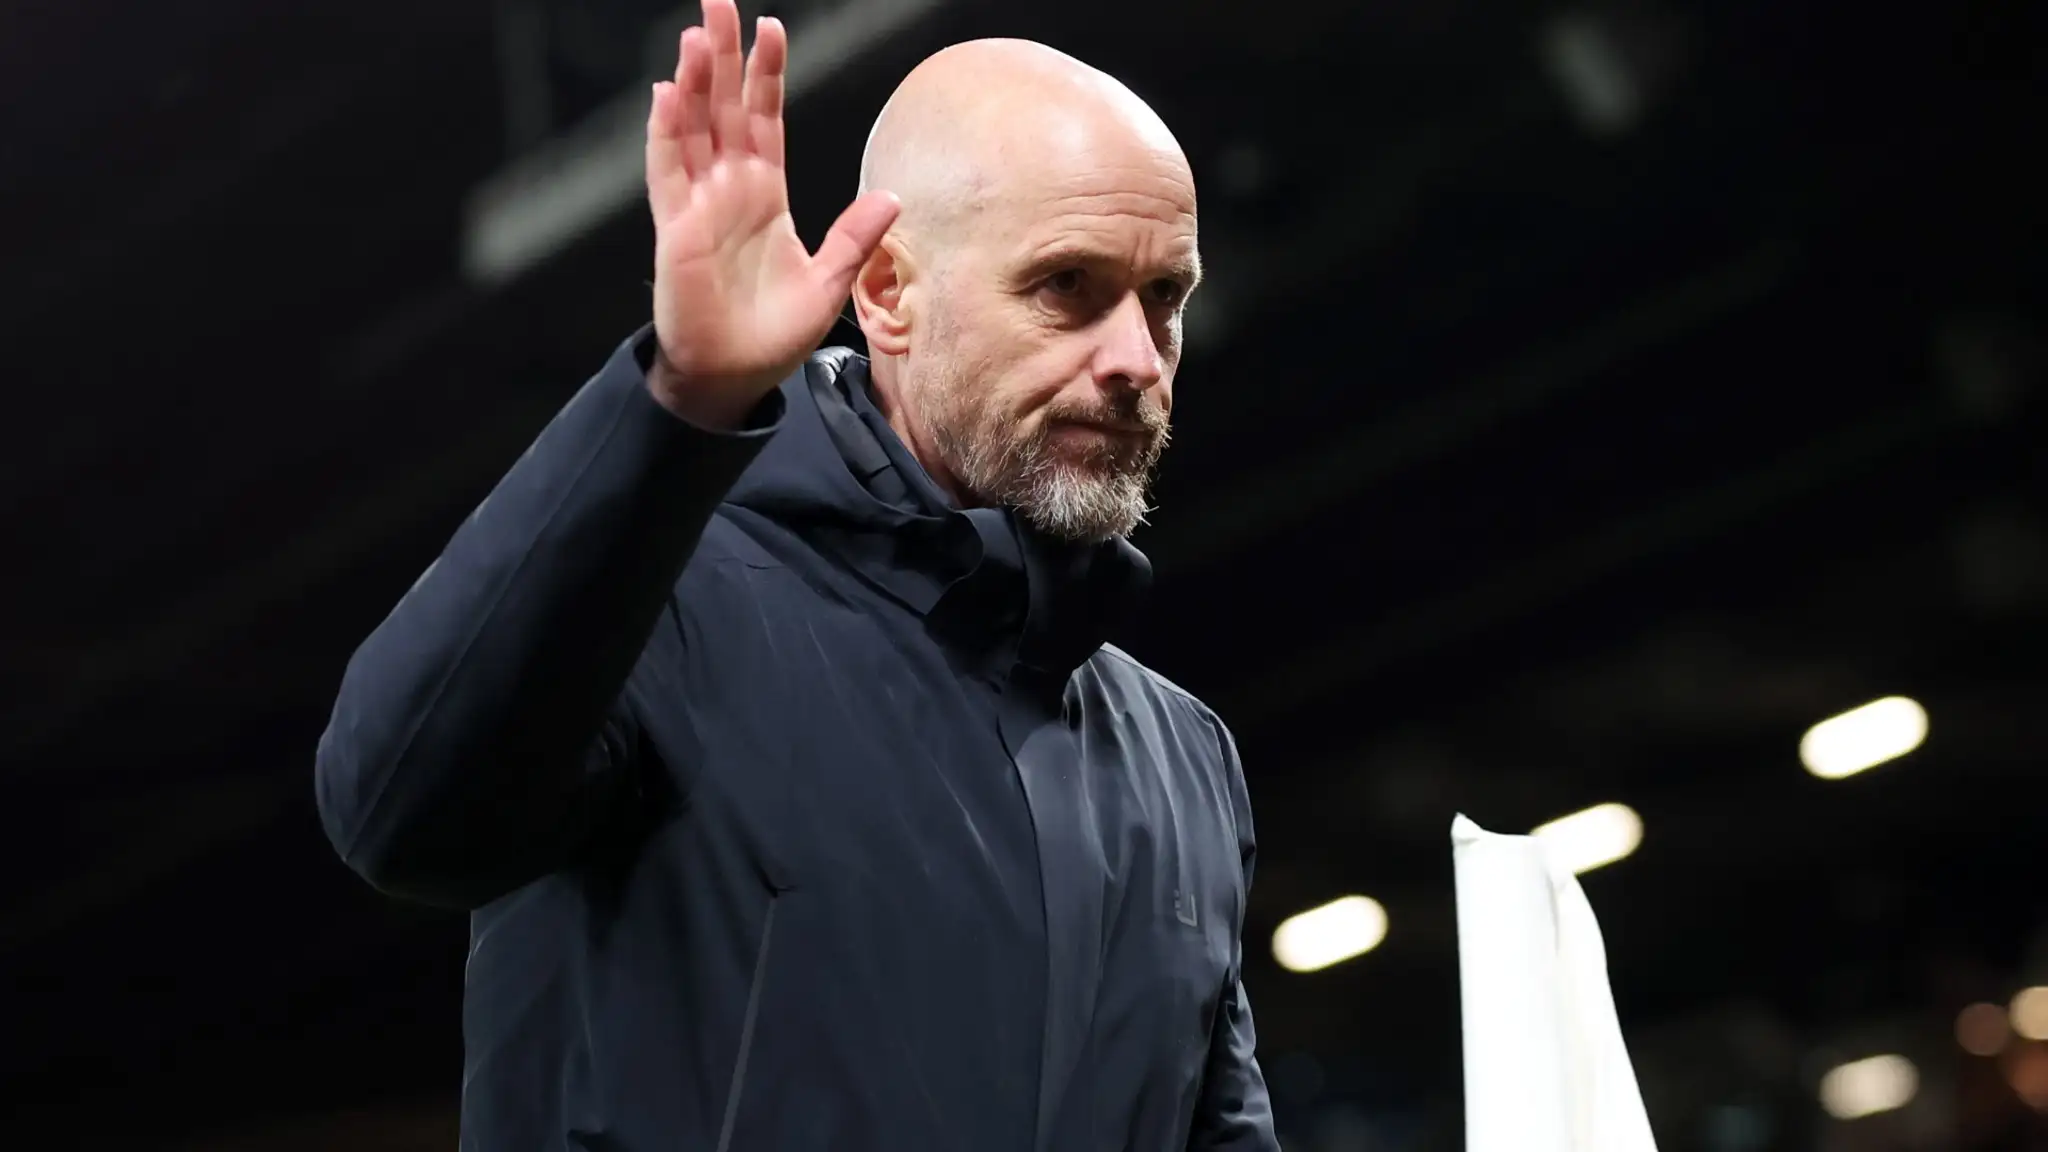 ‘I have no doubt!’ – Erik ten Hag comes out swinging as he insists he is the man to turn Manchester United around after Arsenal defeat